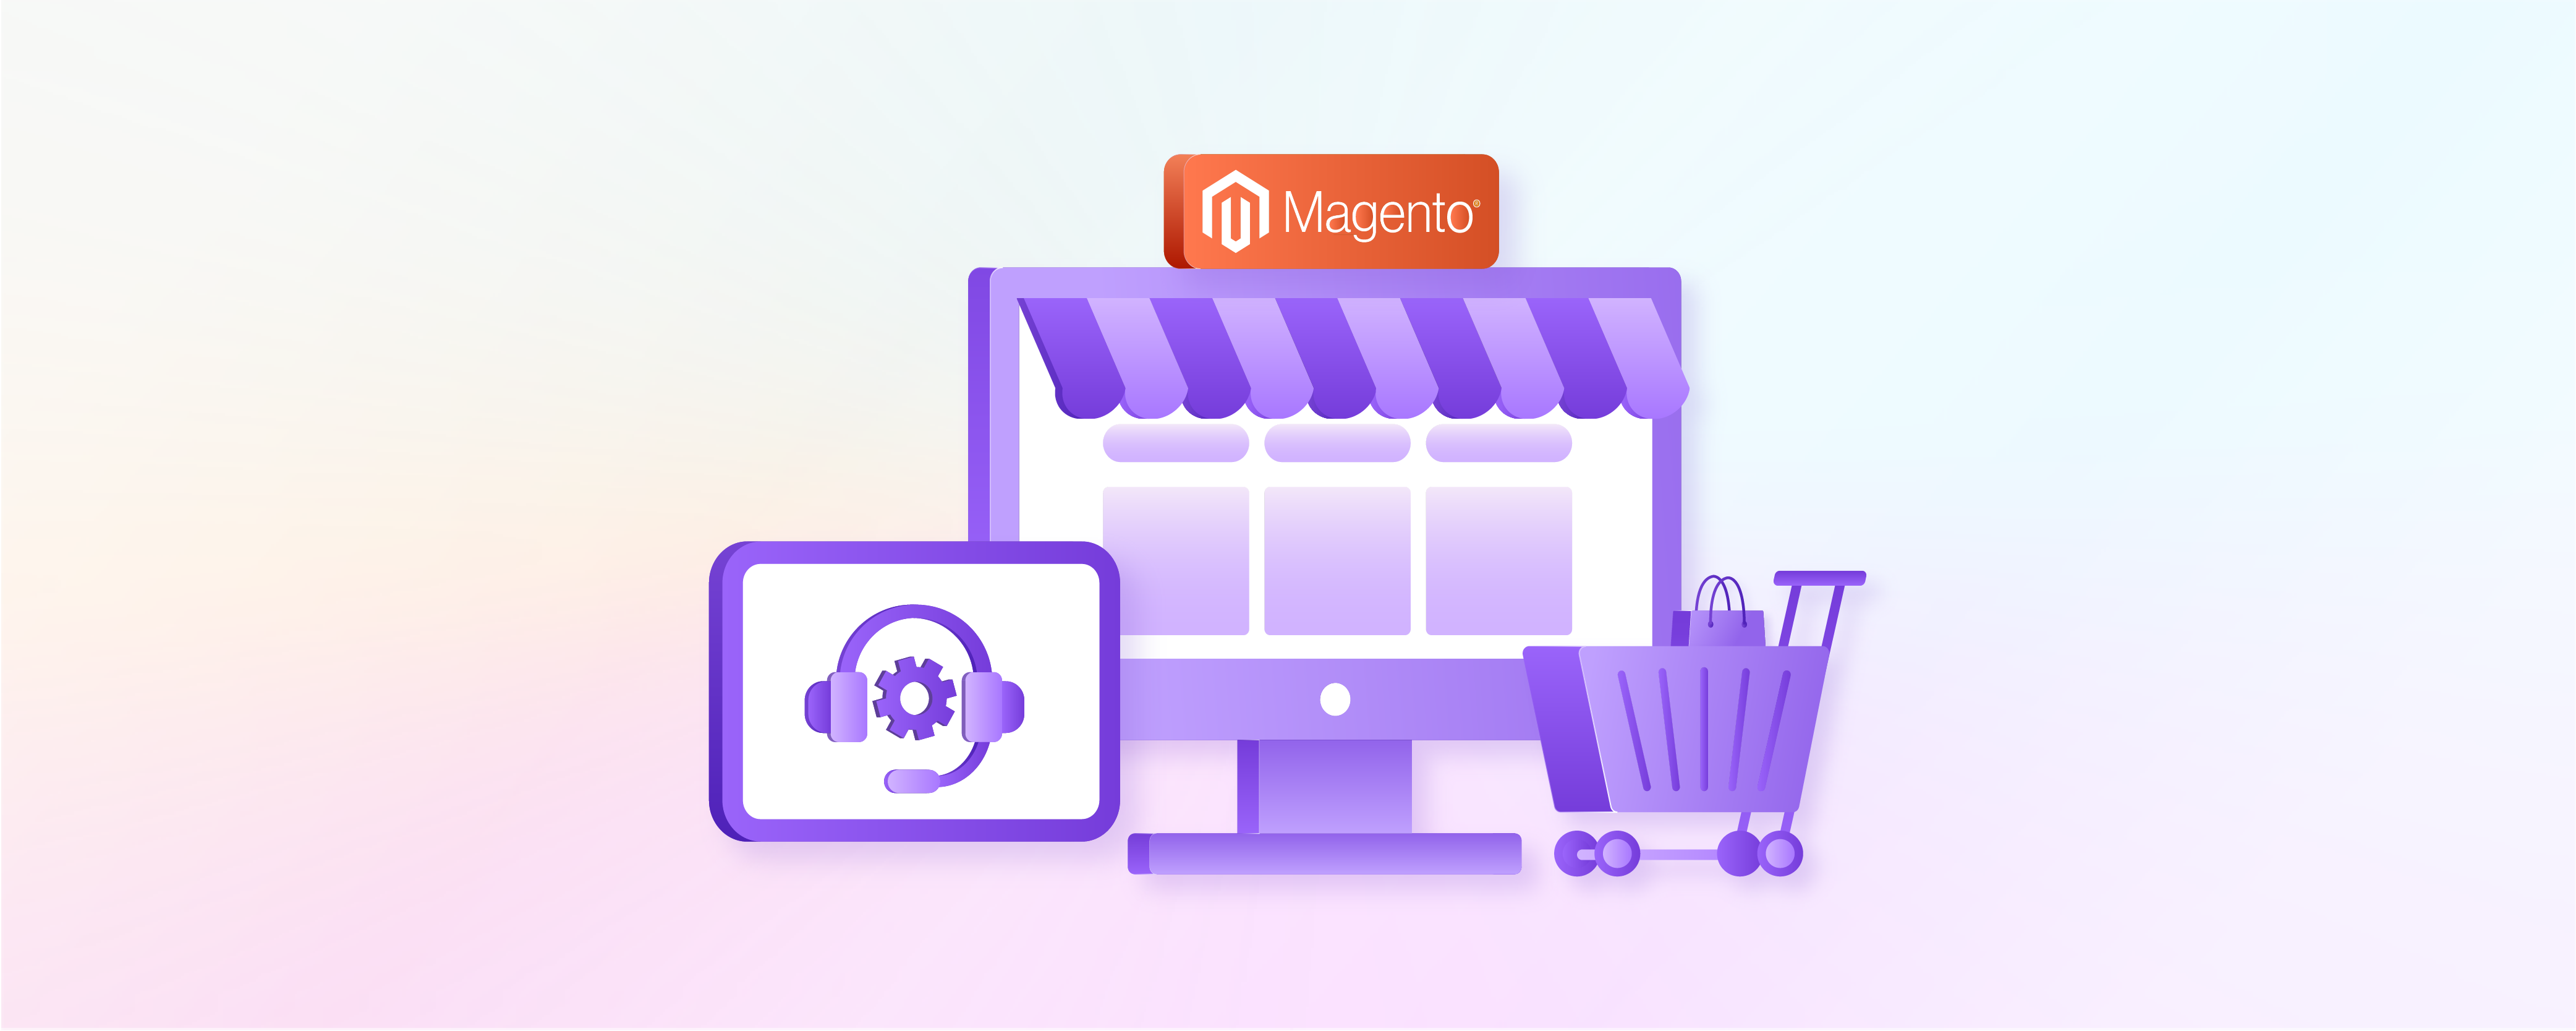 Best Magento Hosting Service for High-Traffic Stores